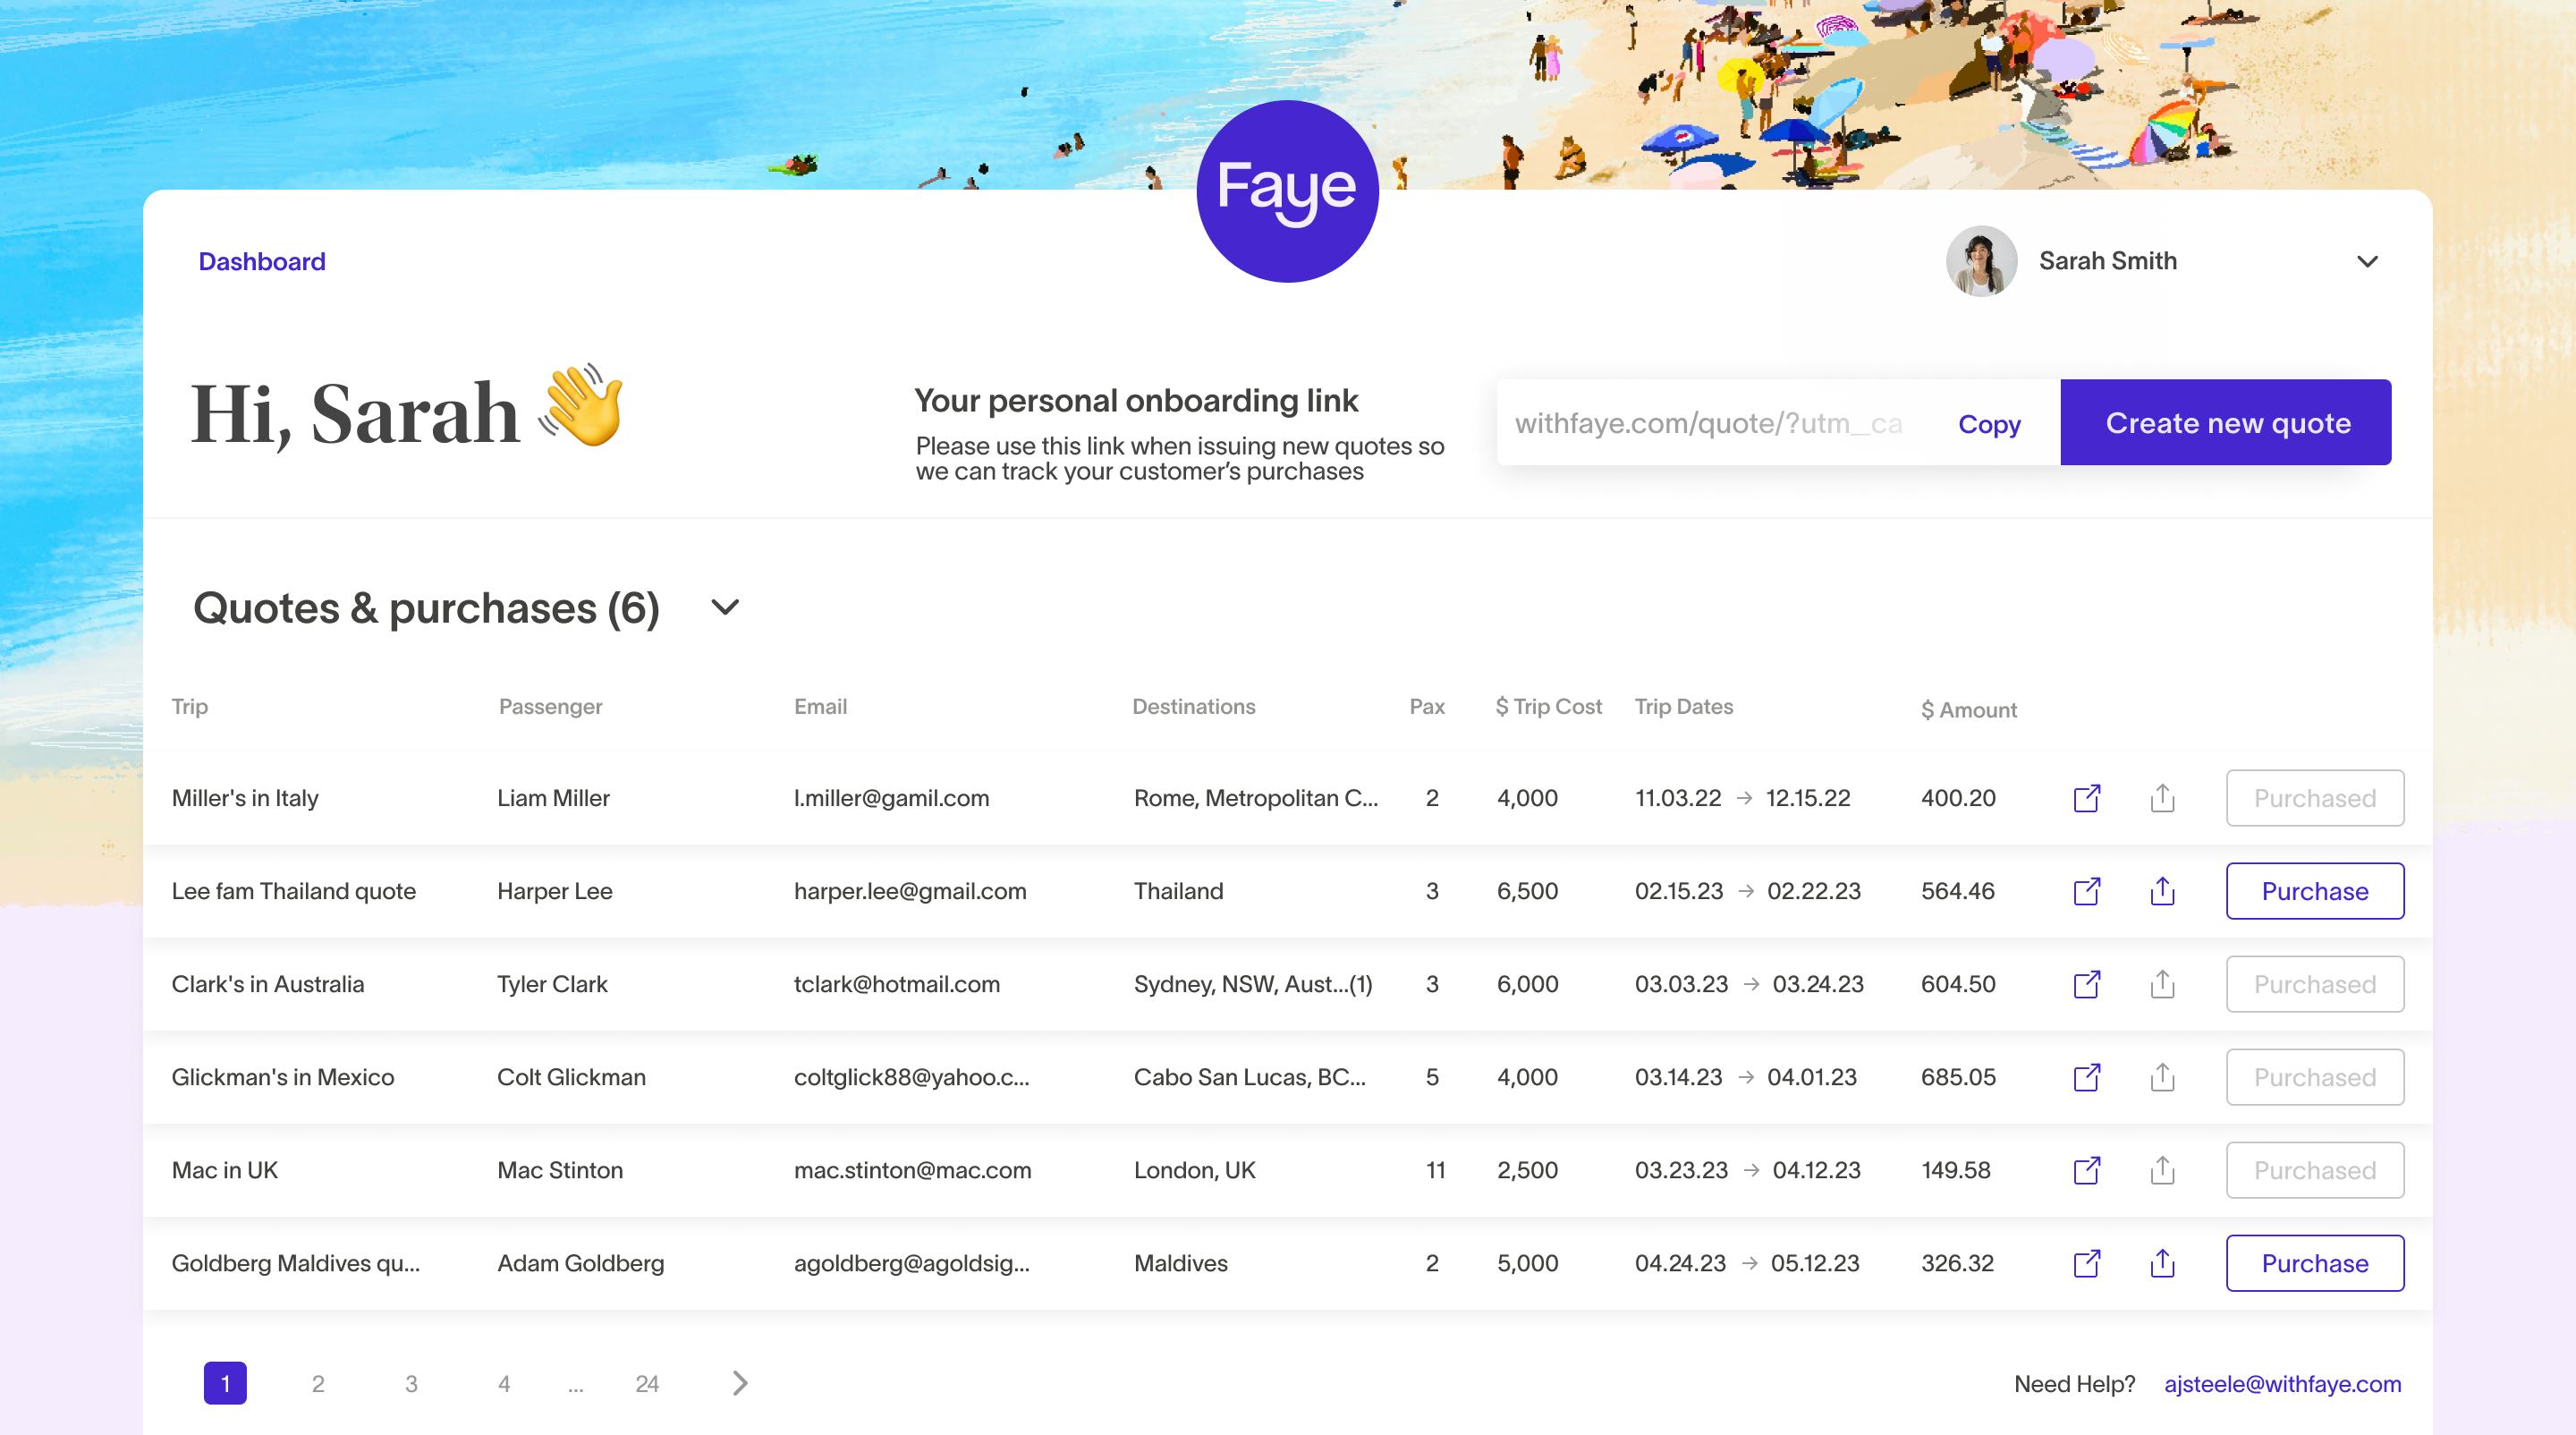 Screenshot of Faye's new travel advisor portal with quotes, purchases and a personal onboarding link